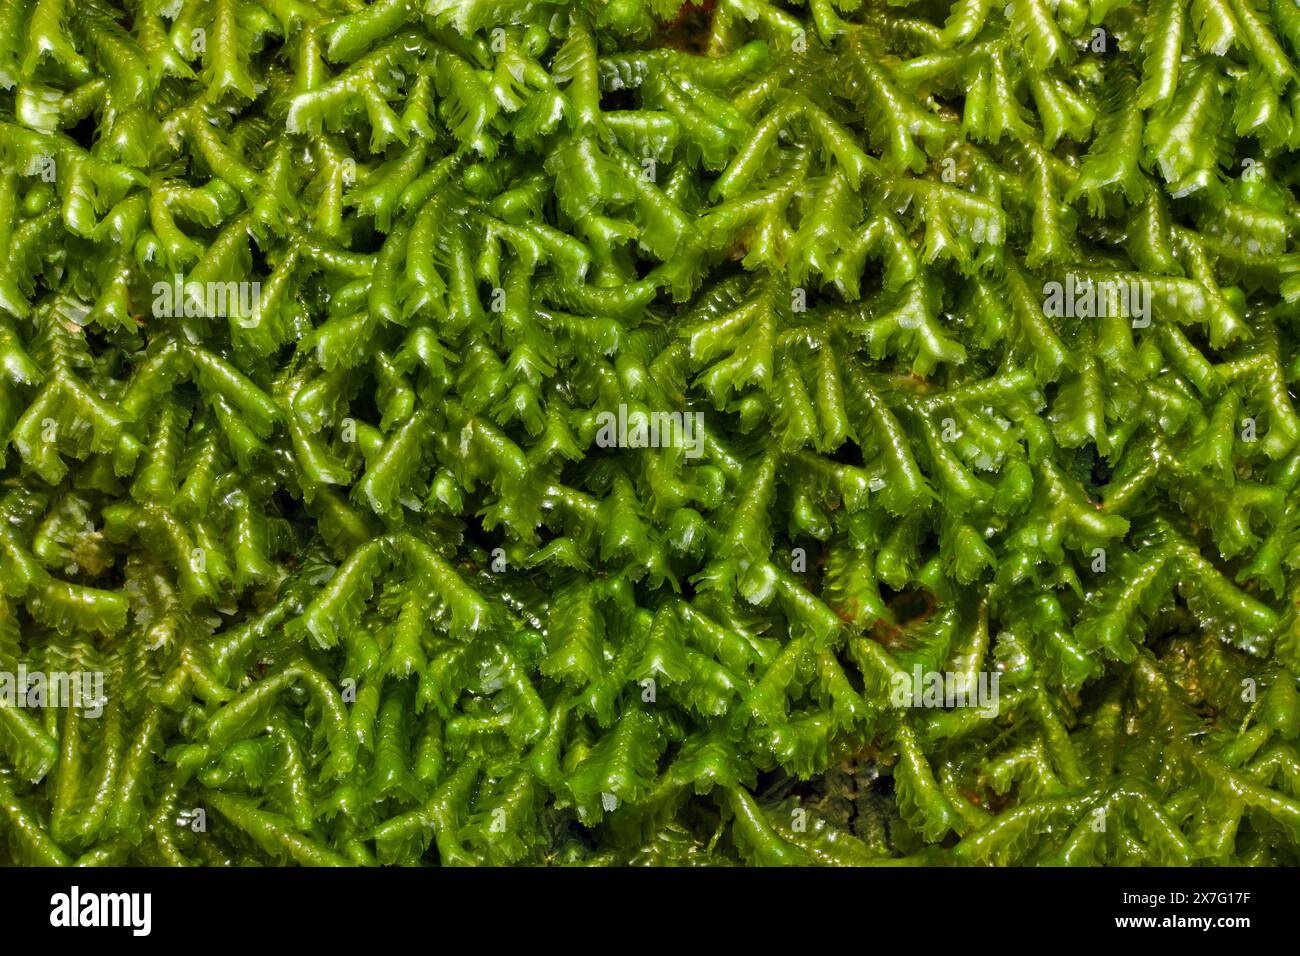 the liverwort Bazzania trilobata (Greater Whipwort) typically occurs in Celtic rainforest in western Britain. It occurs across the Northern Hemisphere. Stock Photo